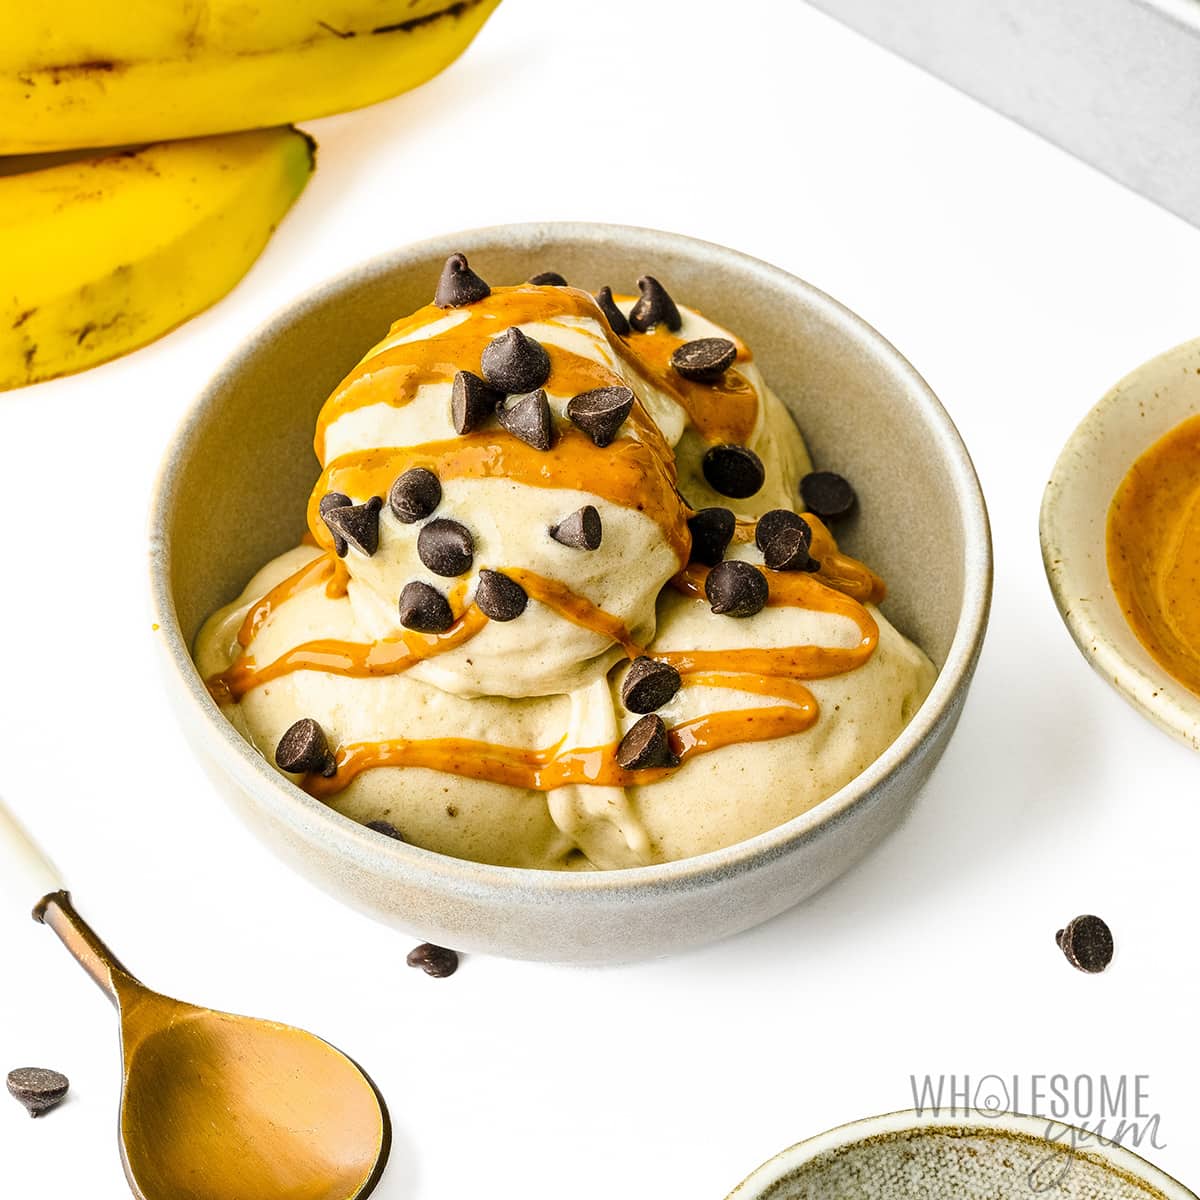 Banana ice cream drizzled with peanut butter and topped with chocolate chips.